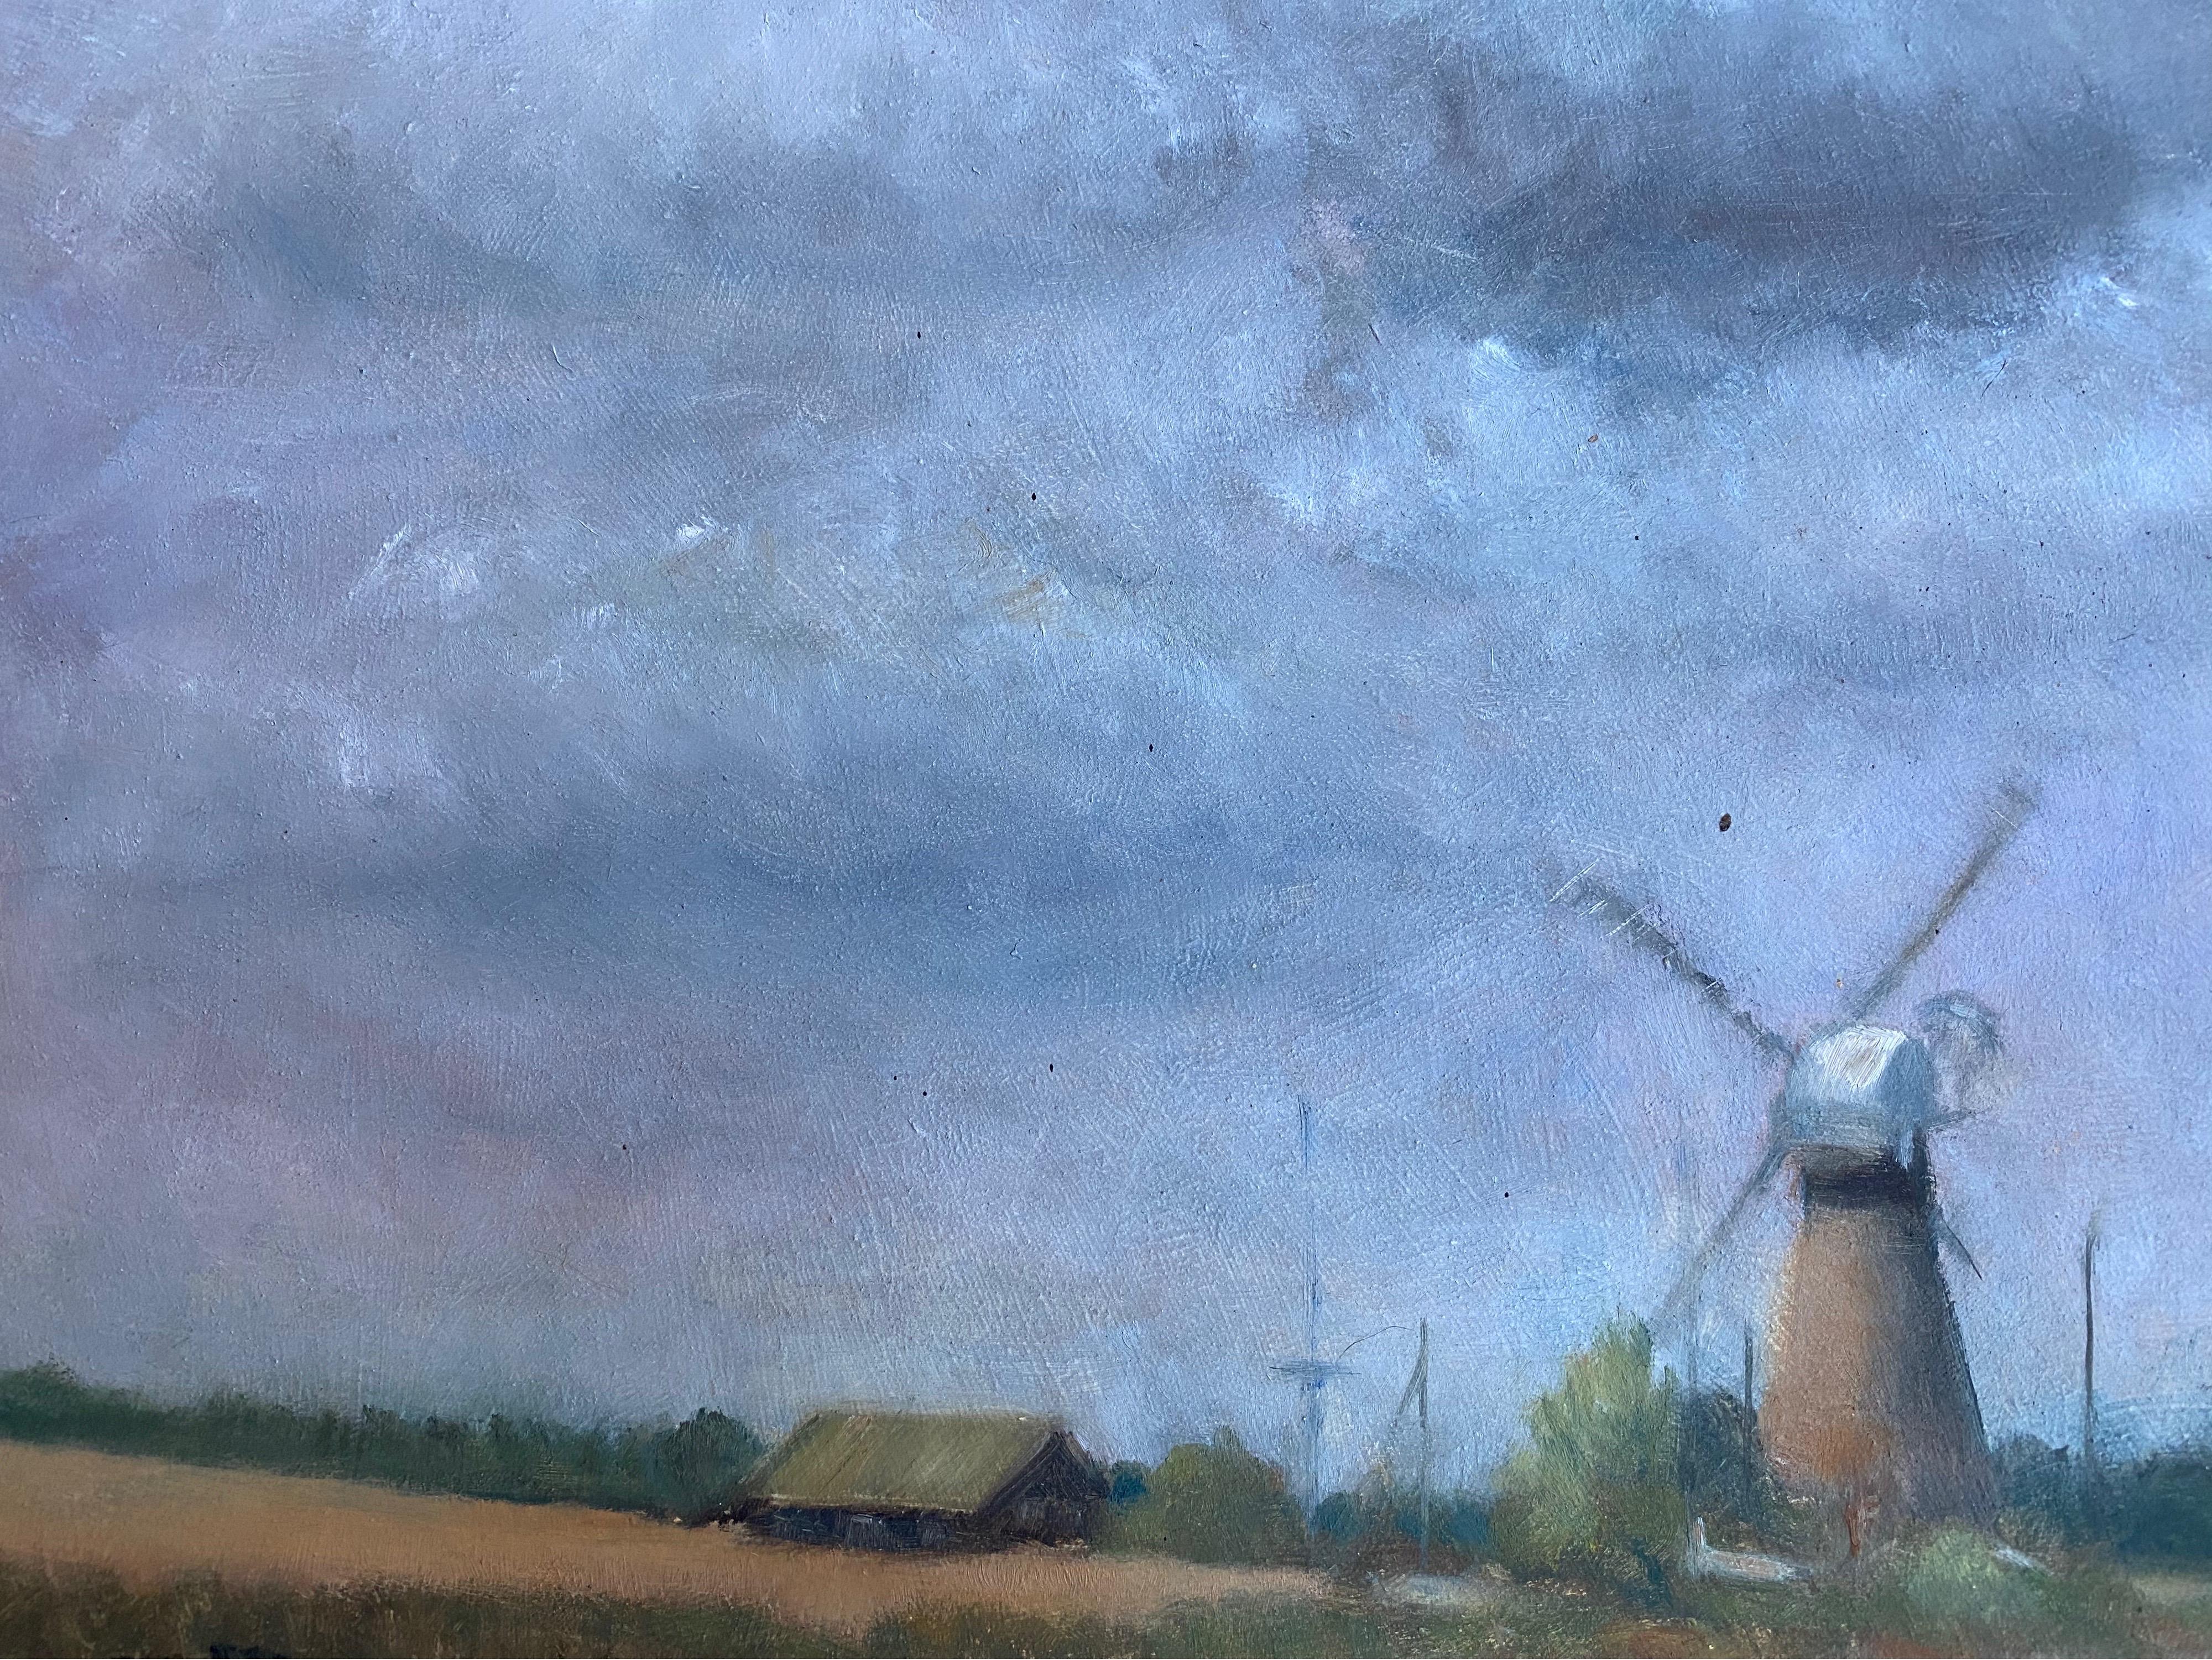 Artist: English Impressionist

Title: Windmill under Blue Skies

Medium: oil painting on board, unframed

Size: painting: 12 x 14 inches

Provenance: private collection, England

Condition: overall very good